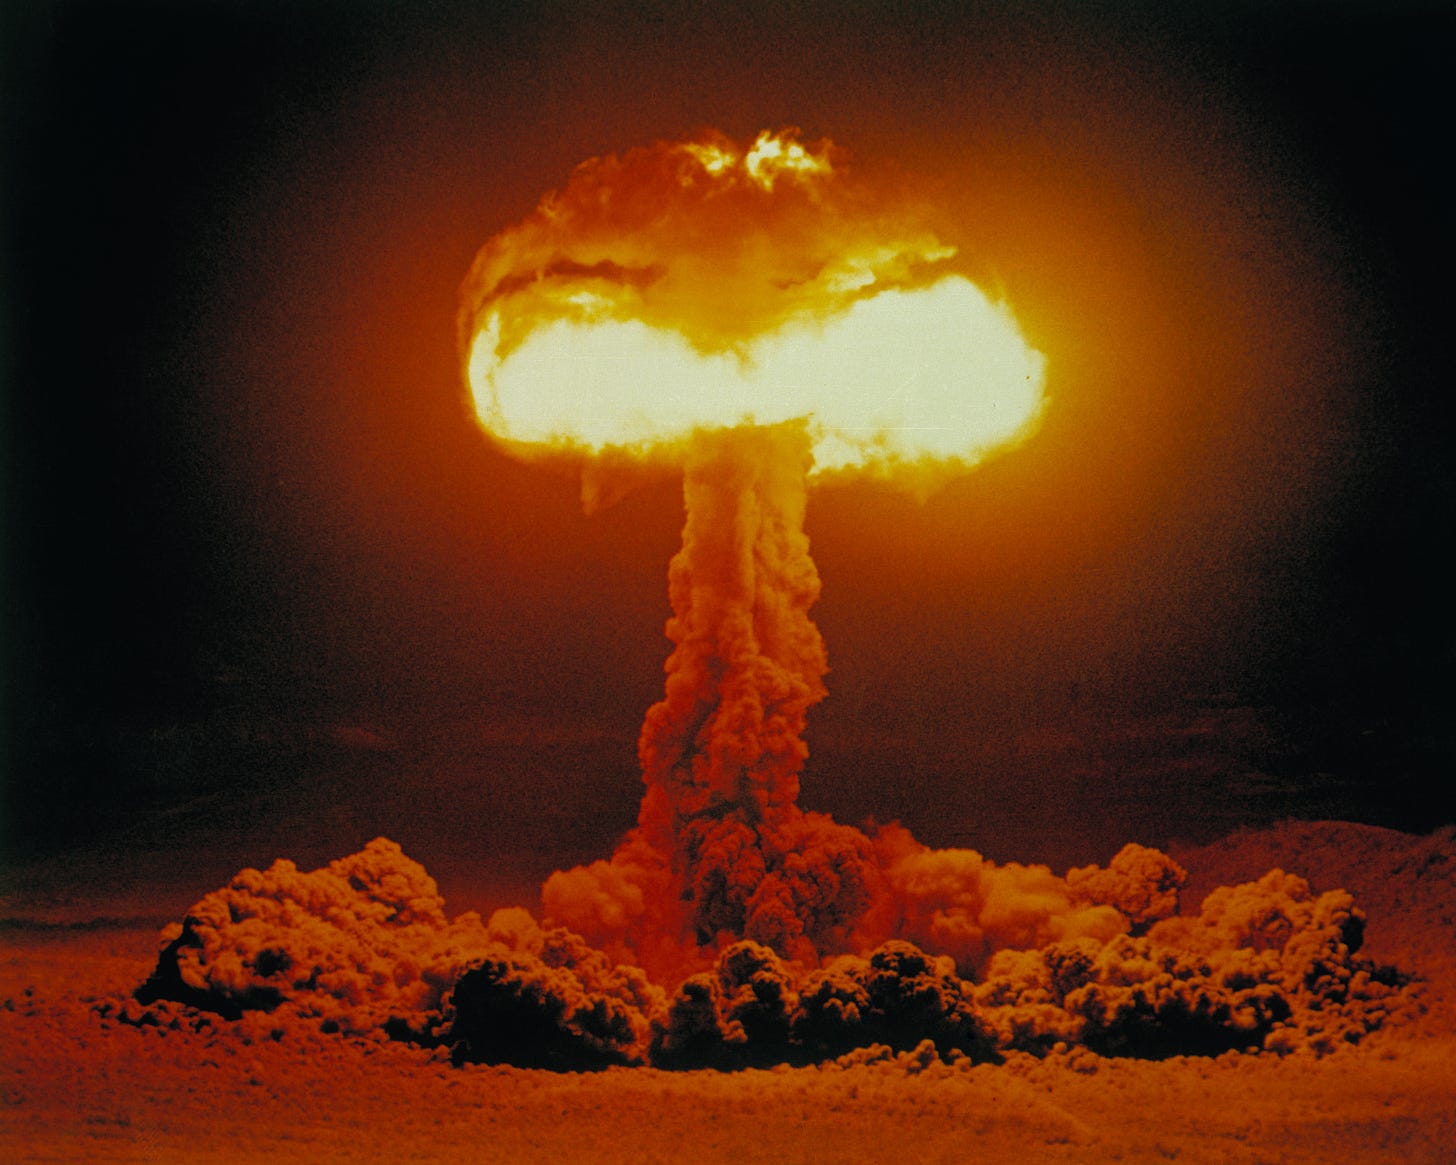 Declassified Videos of Cold War Nuclear Tests Go Viral | Atomic Heritage Foundation